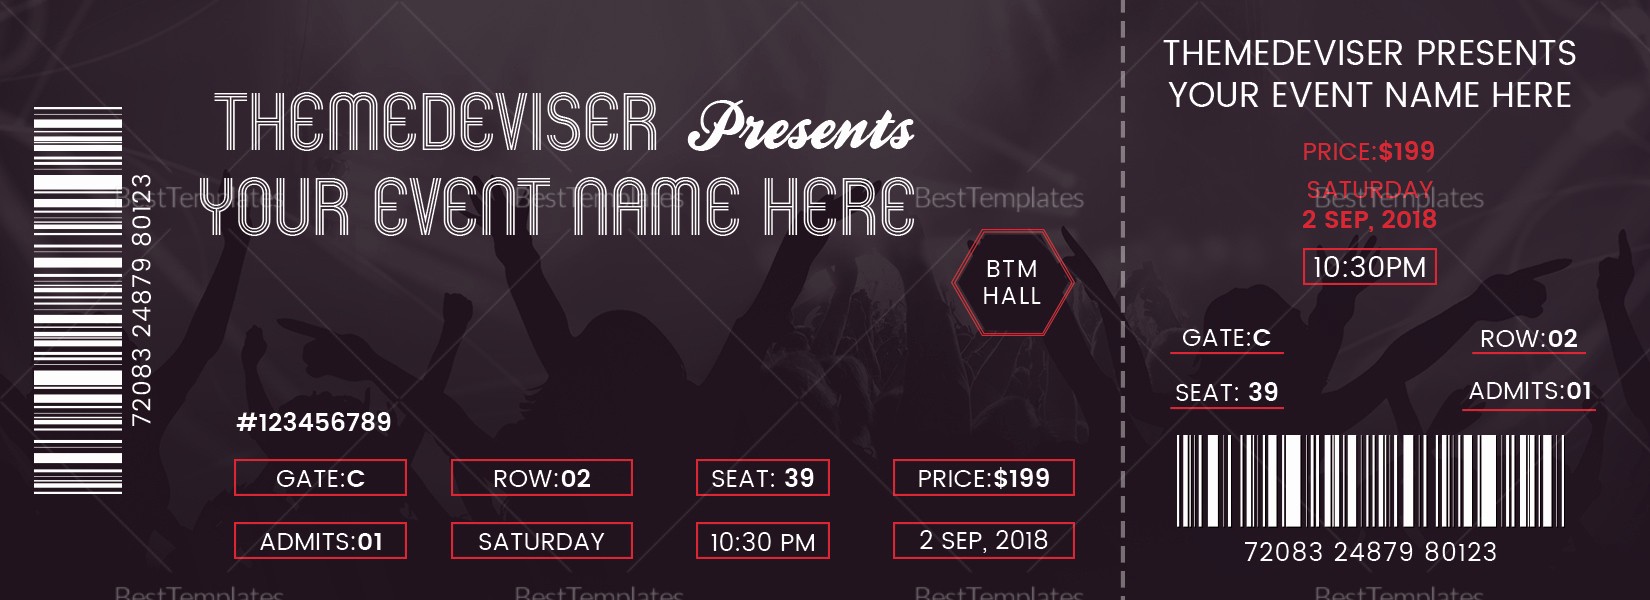 Concert Tickets Template Free Download Beautiful Sample Concert Ticket Design Template In Psd Word